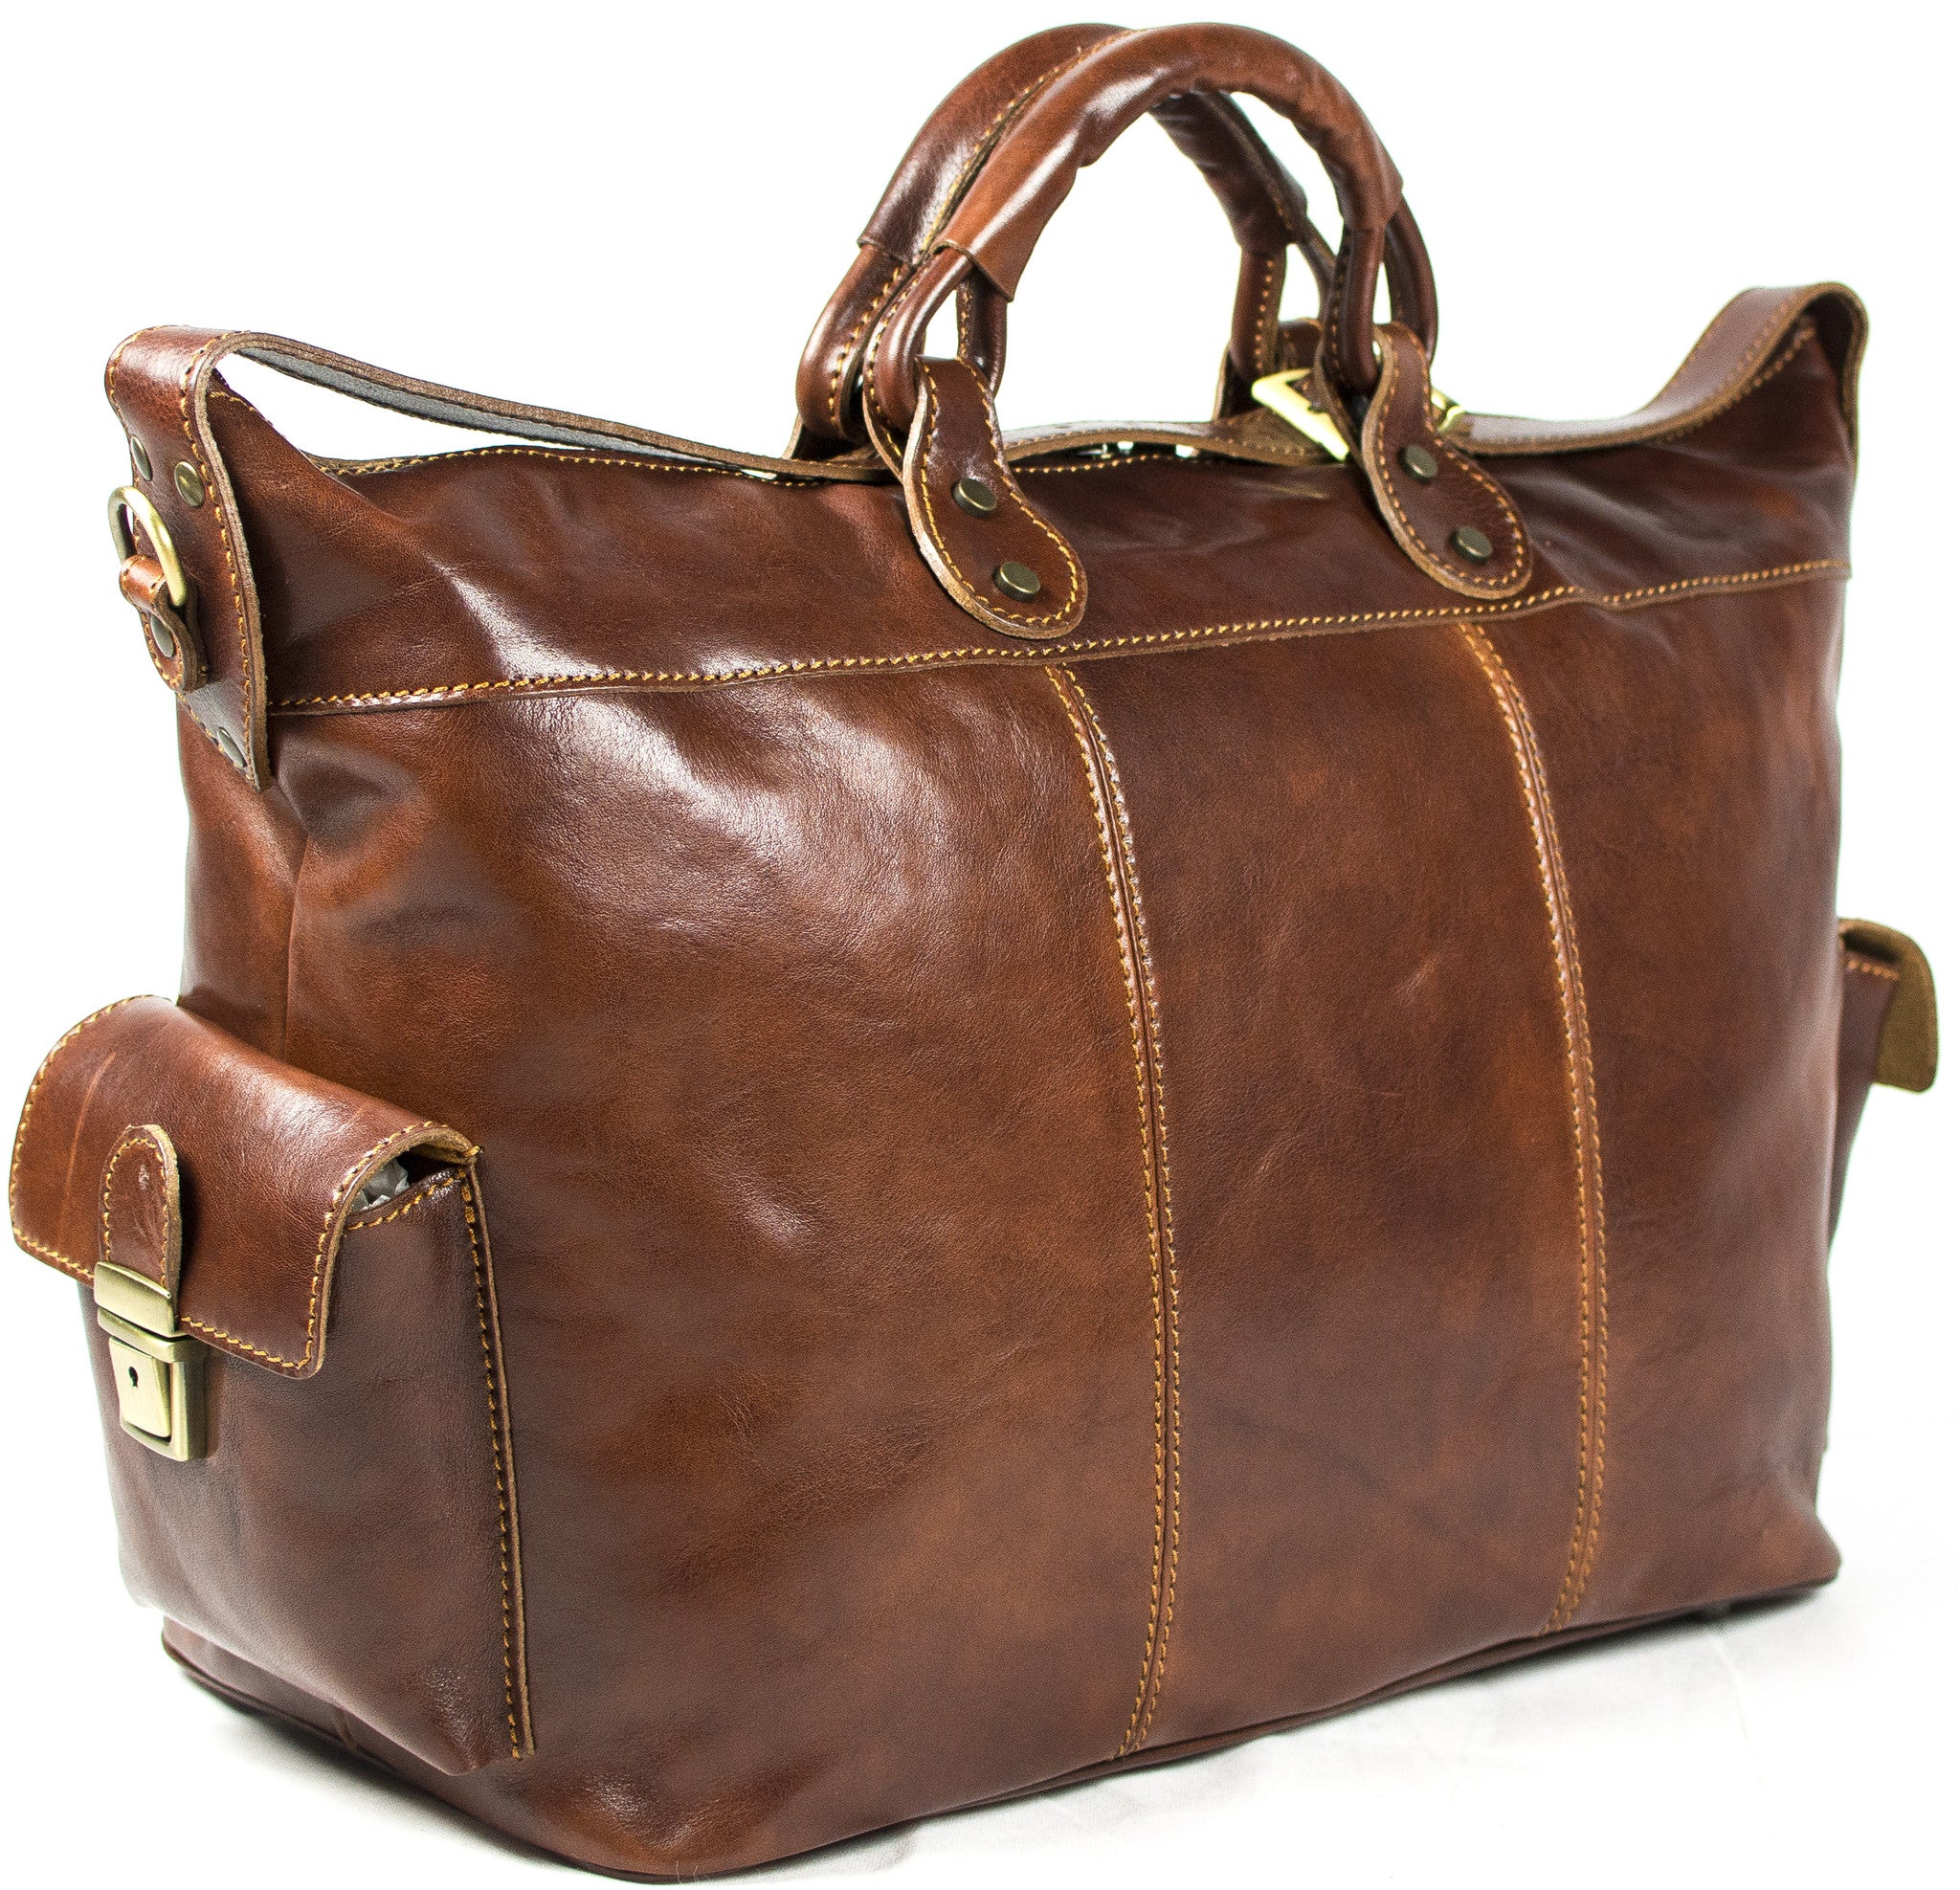 Italian Leather Weekend Travel Hand Luggage Tote Bag - Rivello Leather